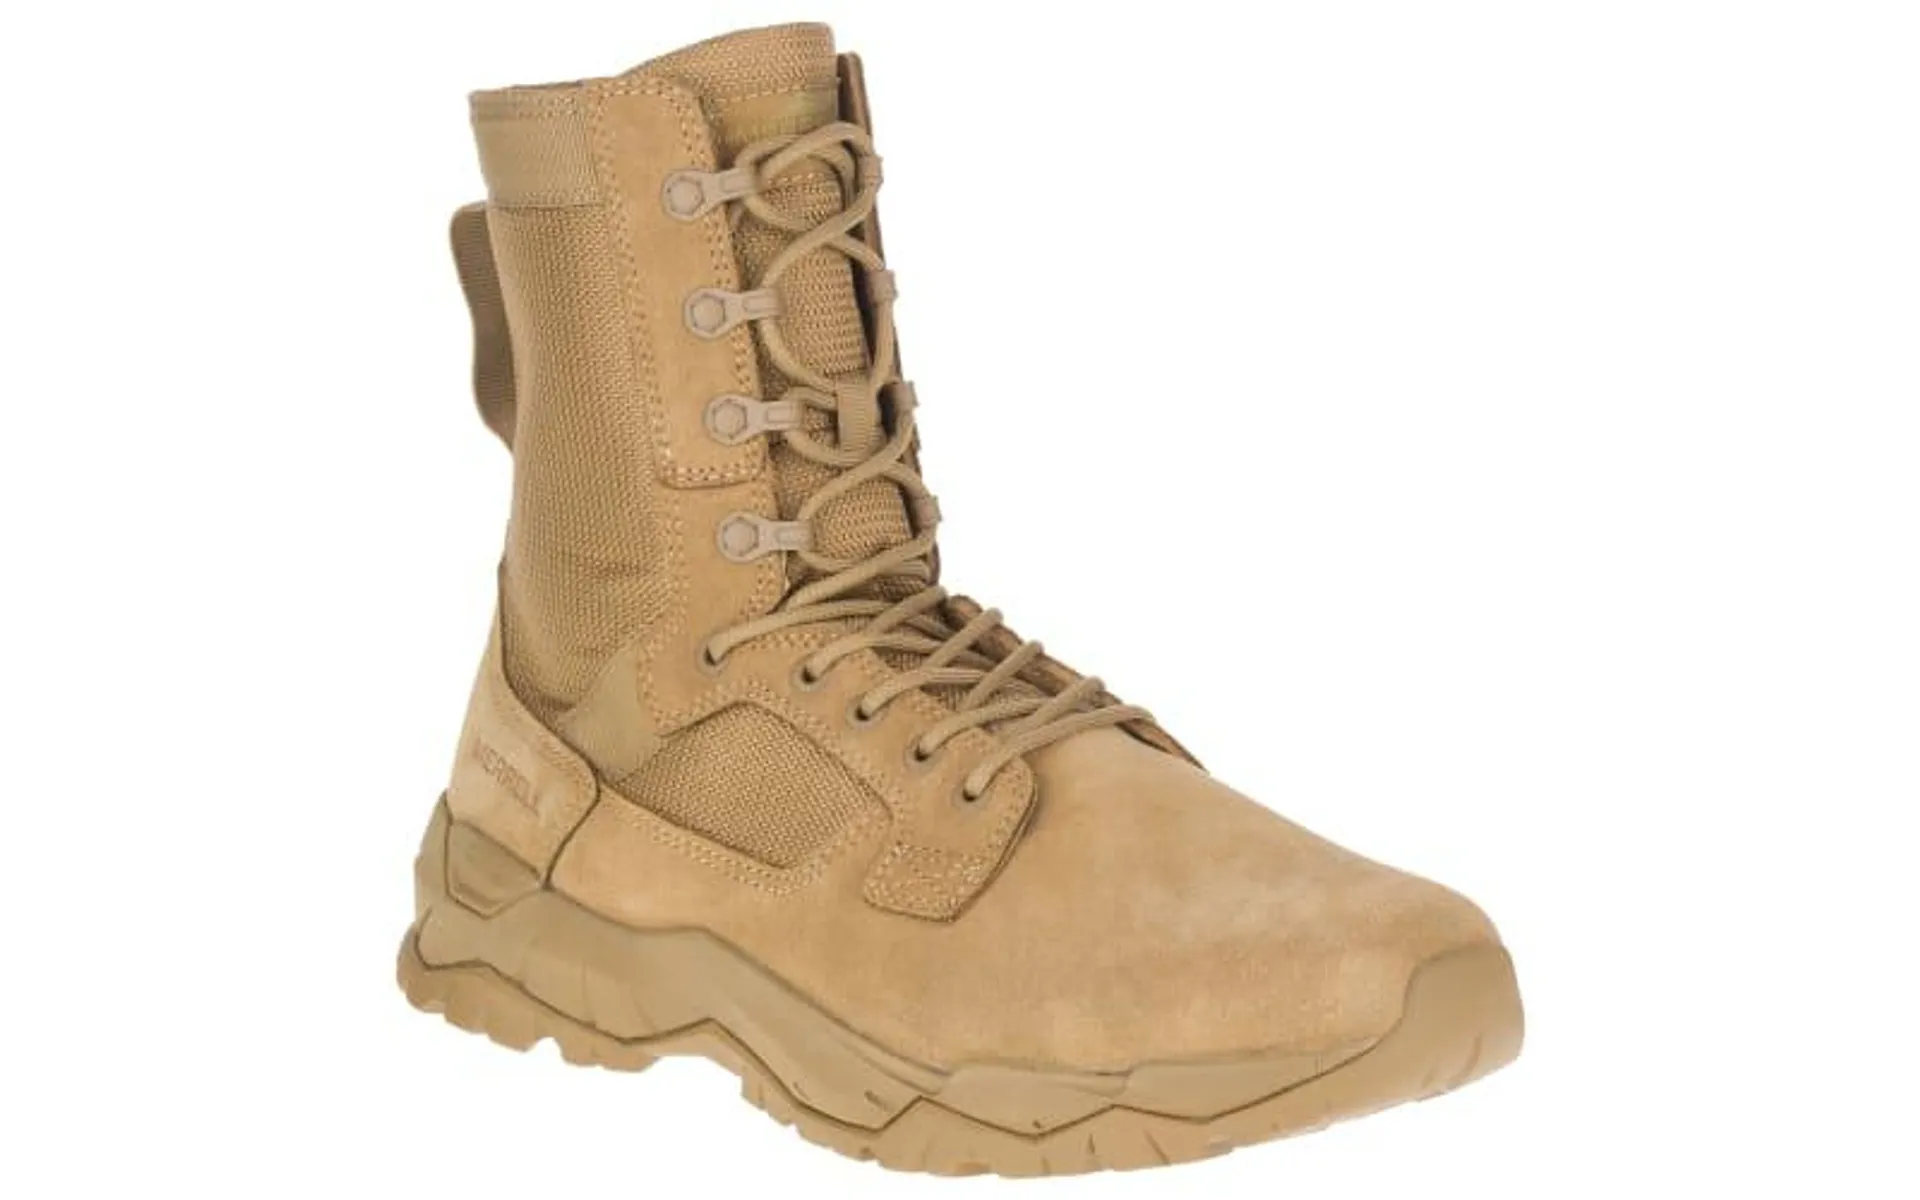 Merrell MQC 2 Tactical Work Boots for Men